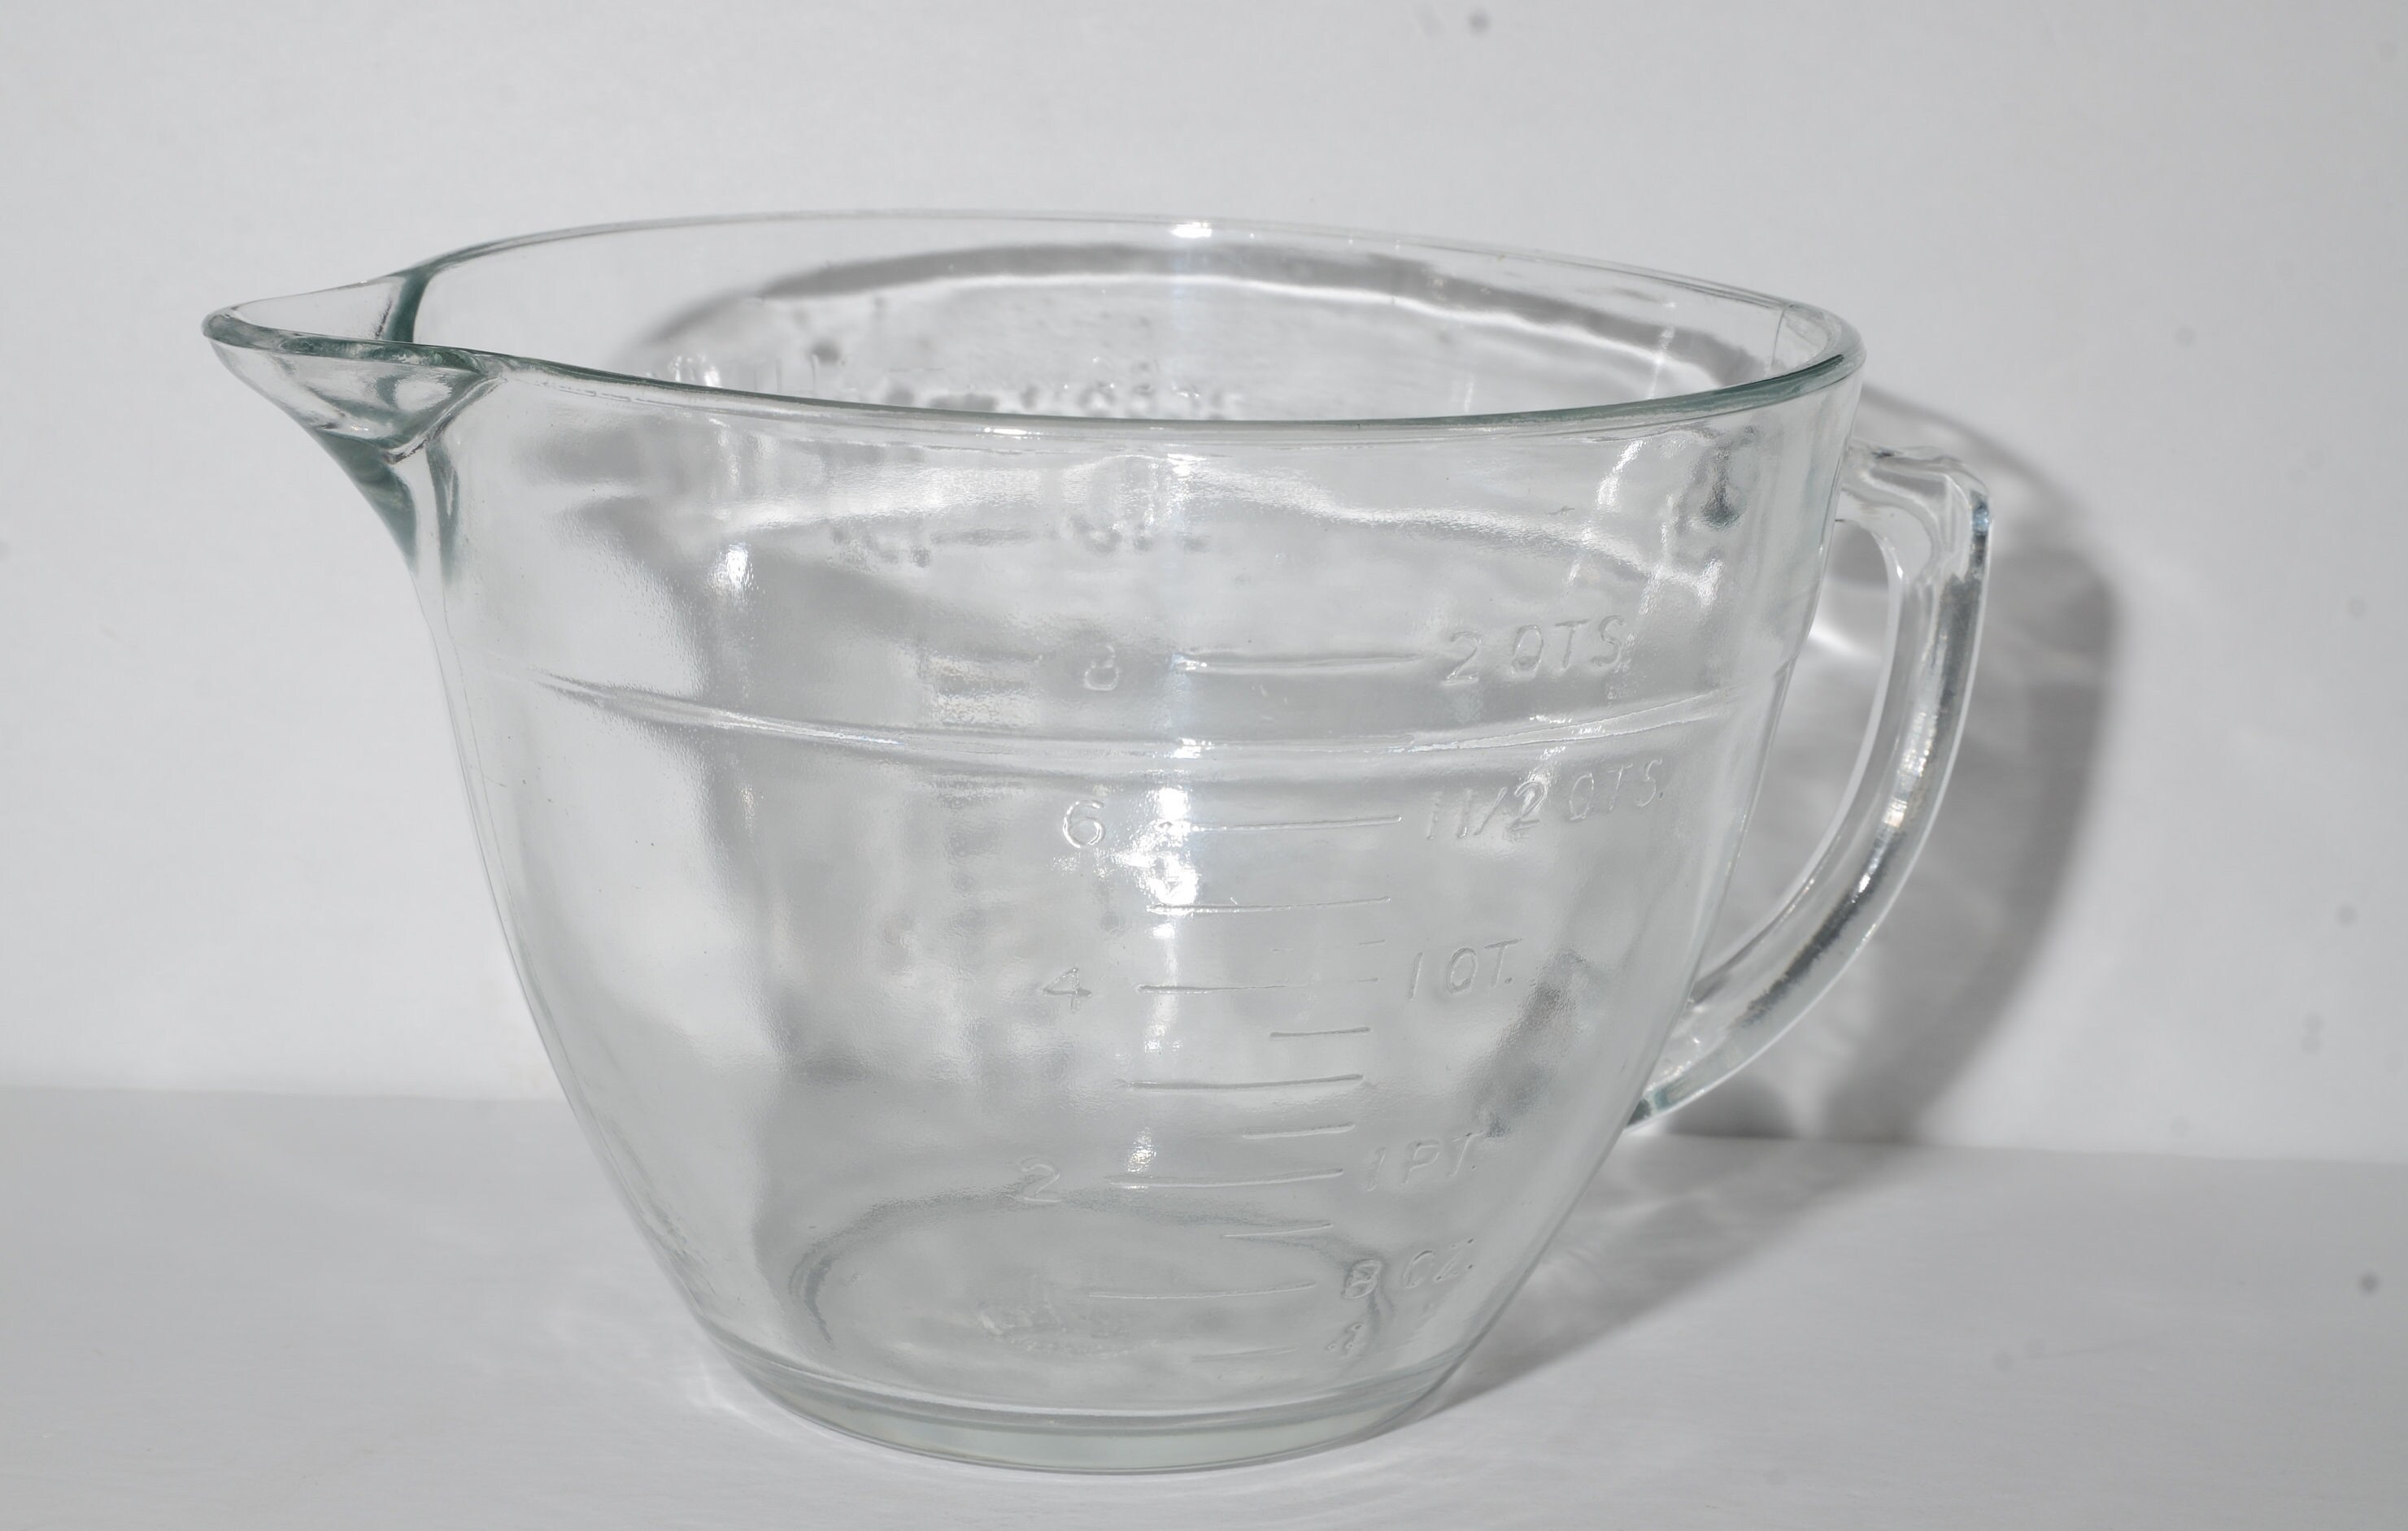 Anchor Hocking 2 Quart Measuring Cup BADLY ETCHED Glass Batter Bowl LOW!  PRICE!